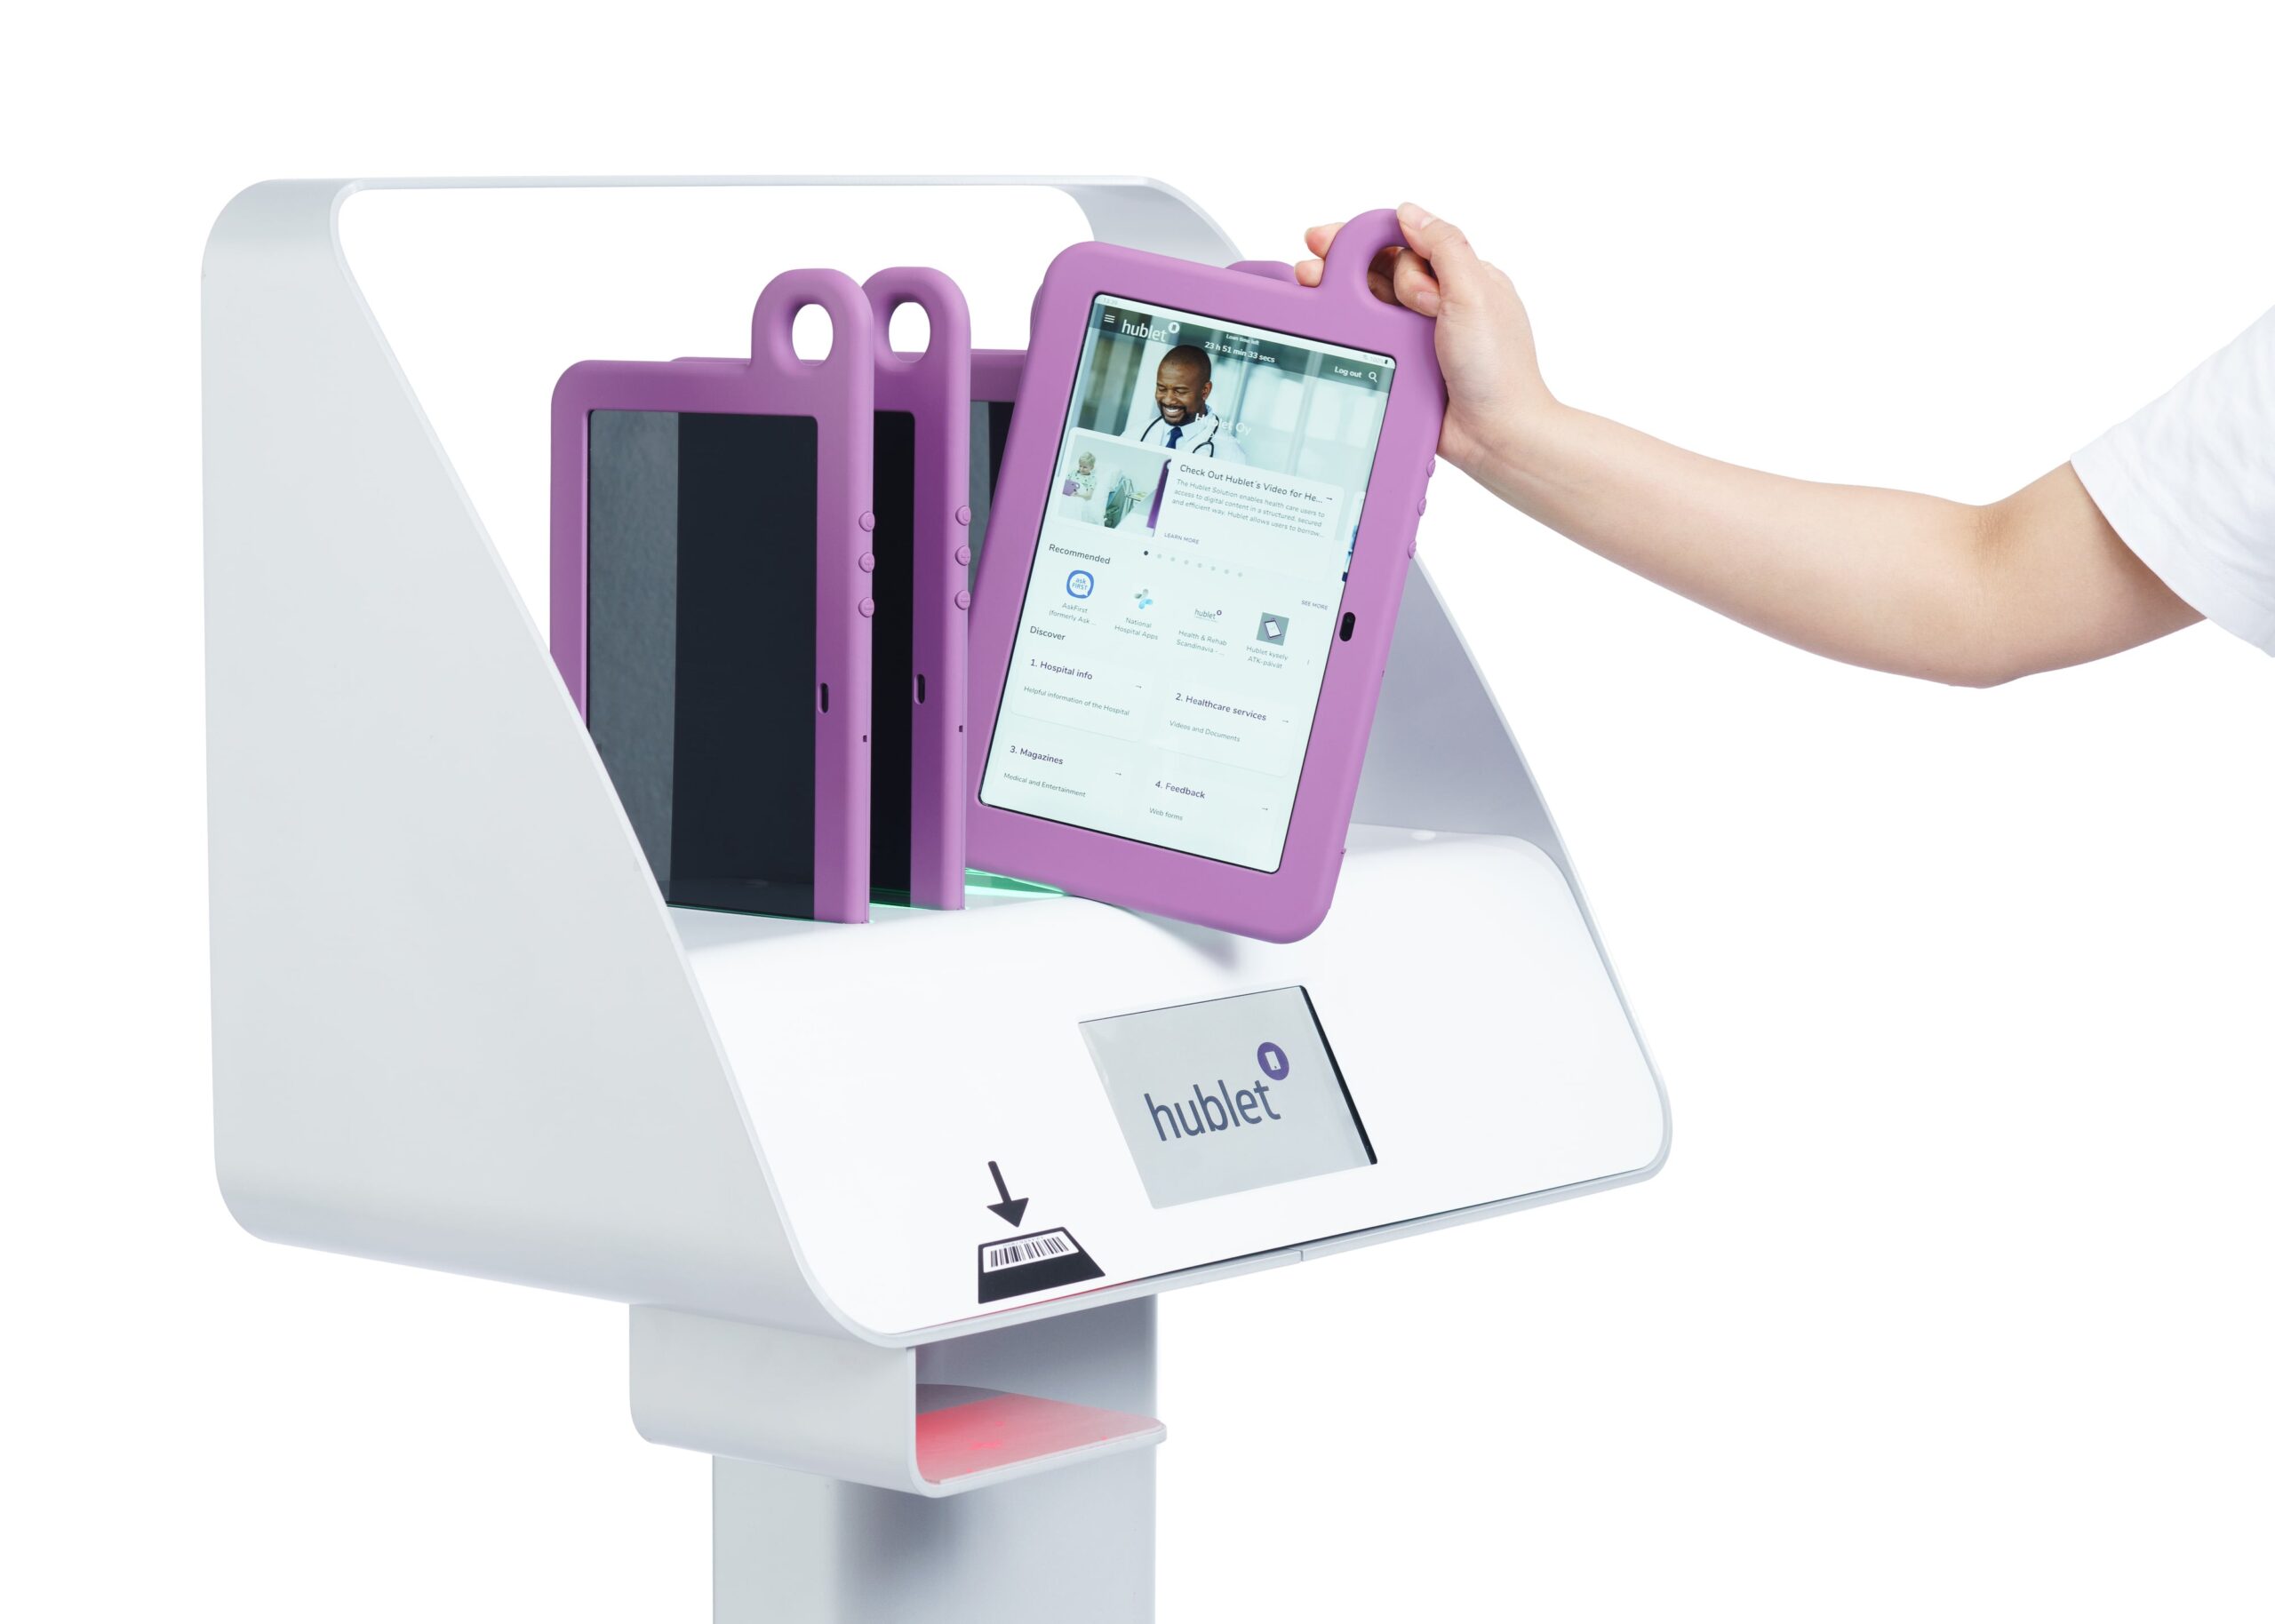 Take-out-Tablet-from-Hublet-Smart-Docking-Station-close-up-min-scaled